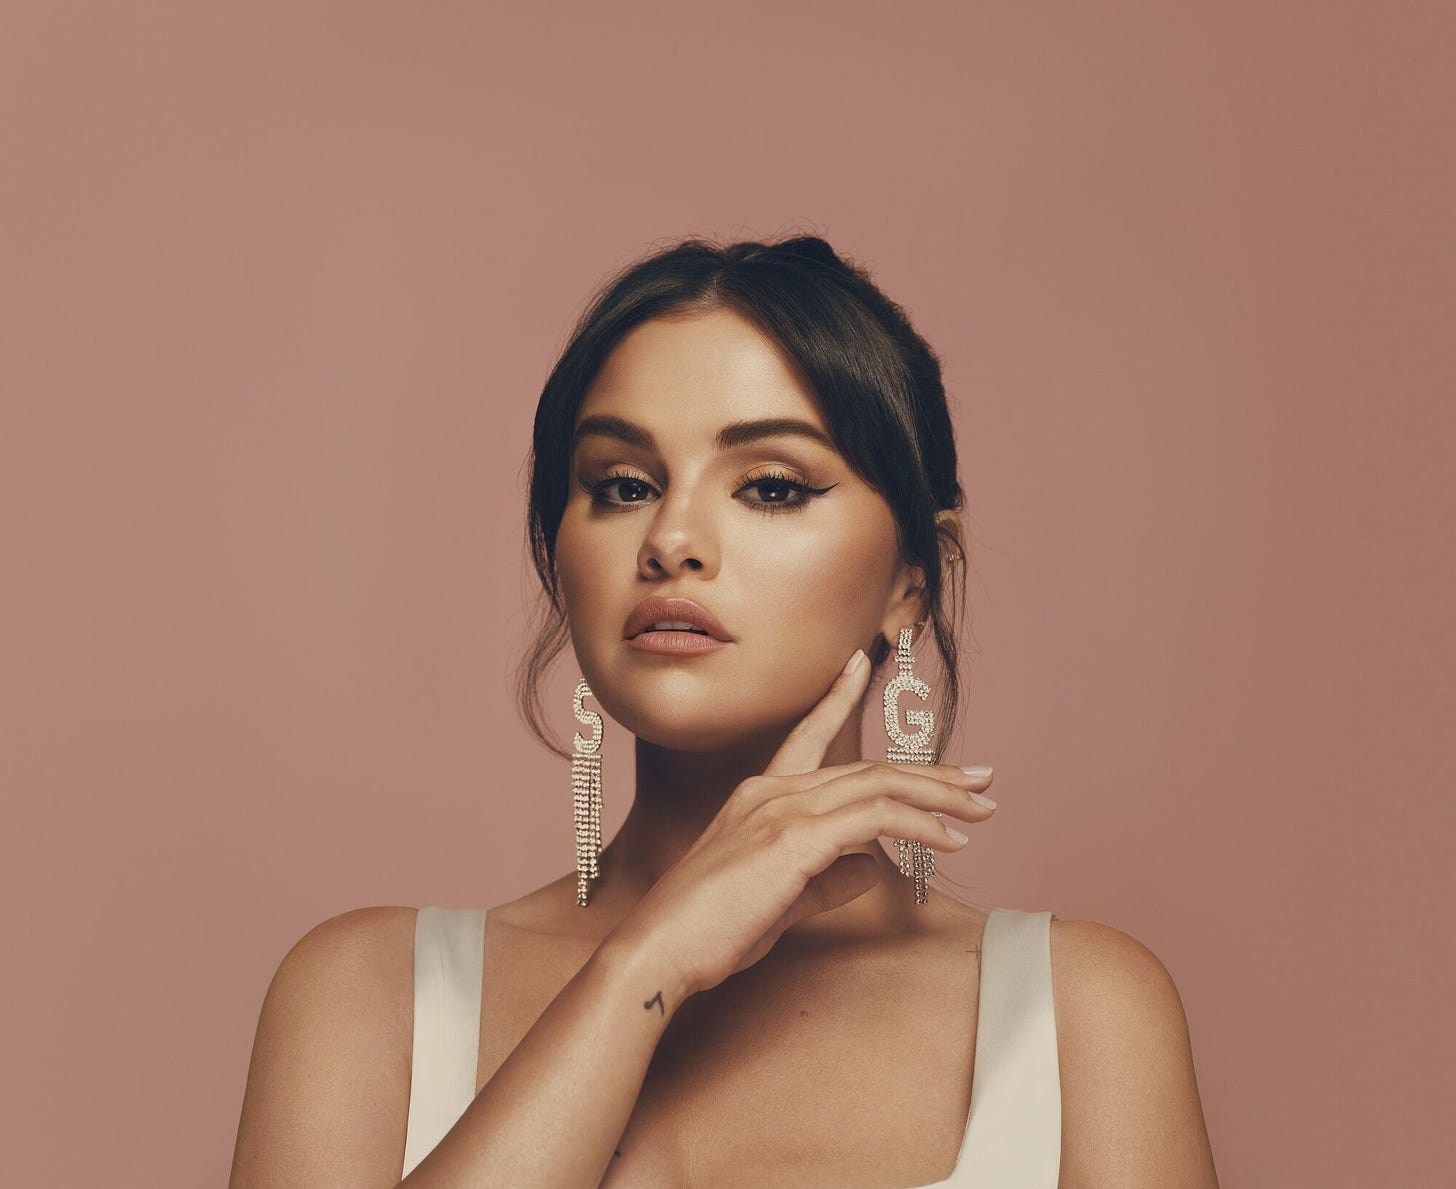 Selena Gomez poses with her hand under her chin, wearing long dangly earrings in the shape of an S and G, in front of a brown background.